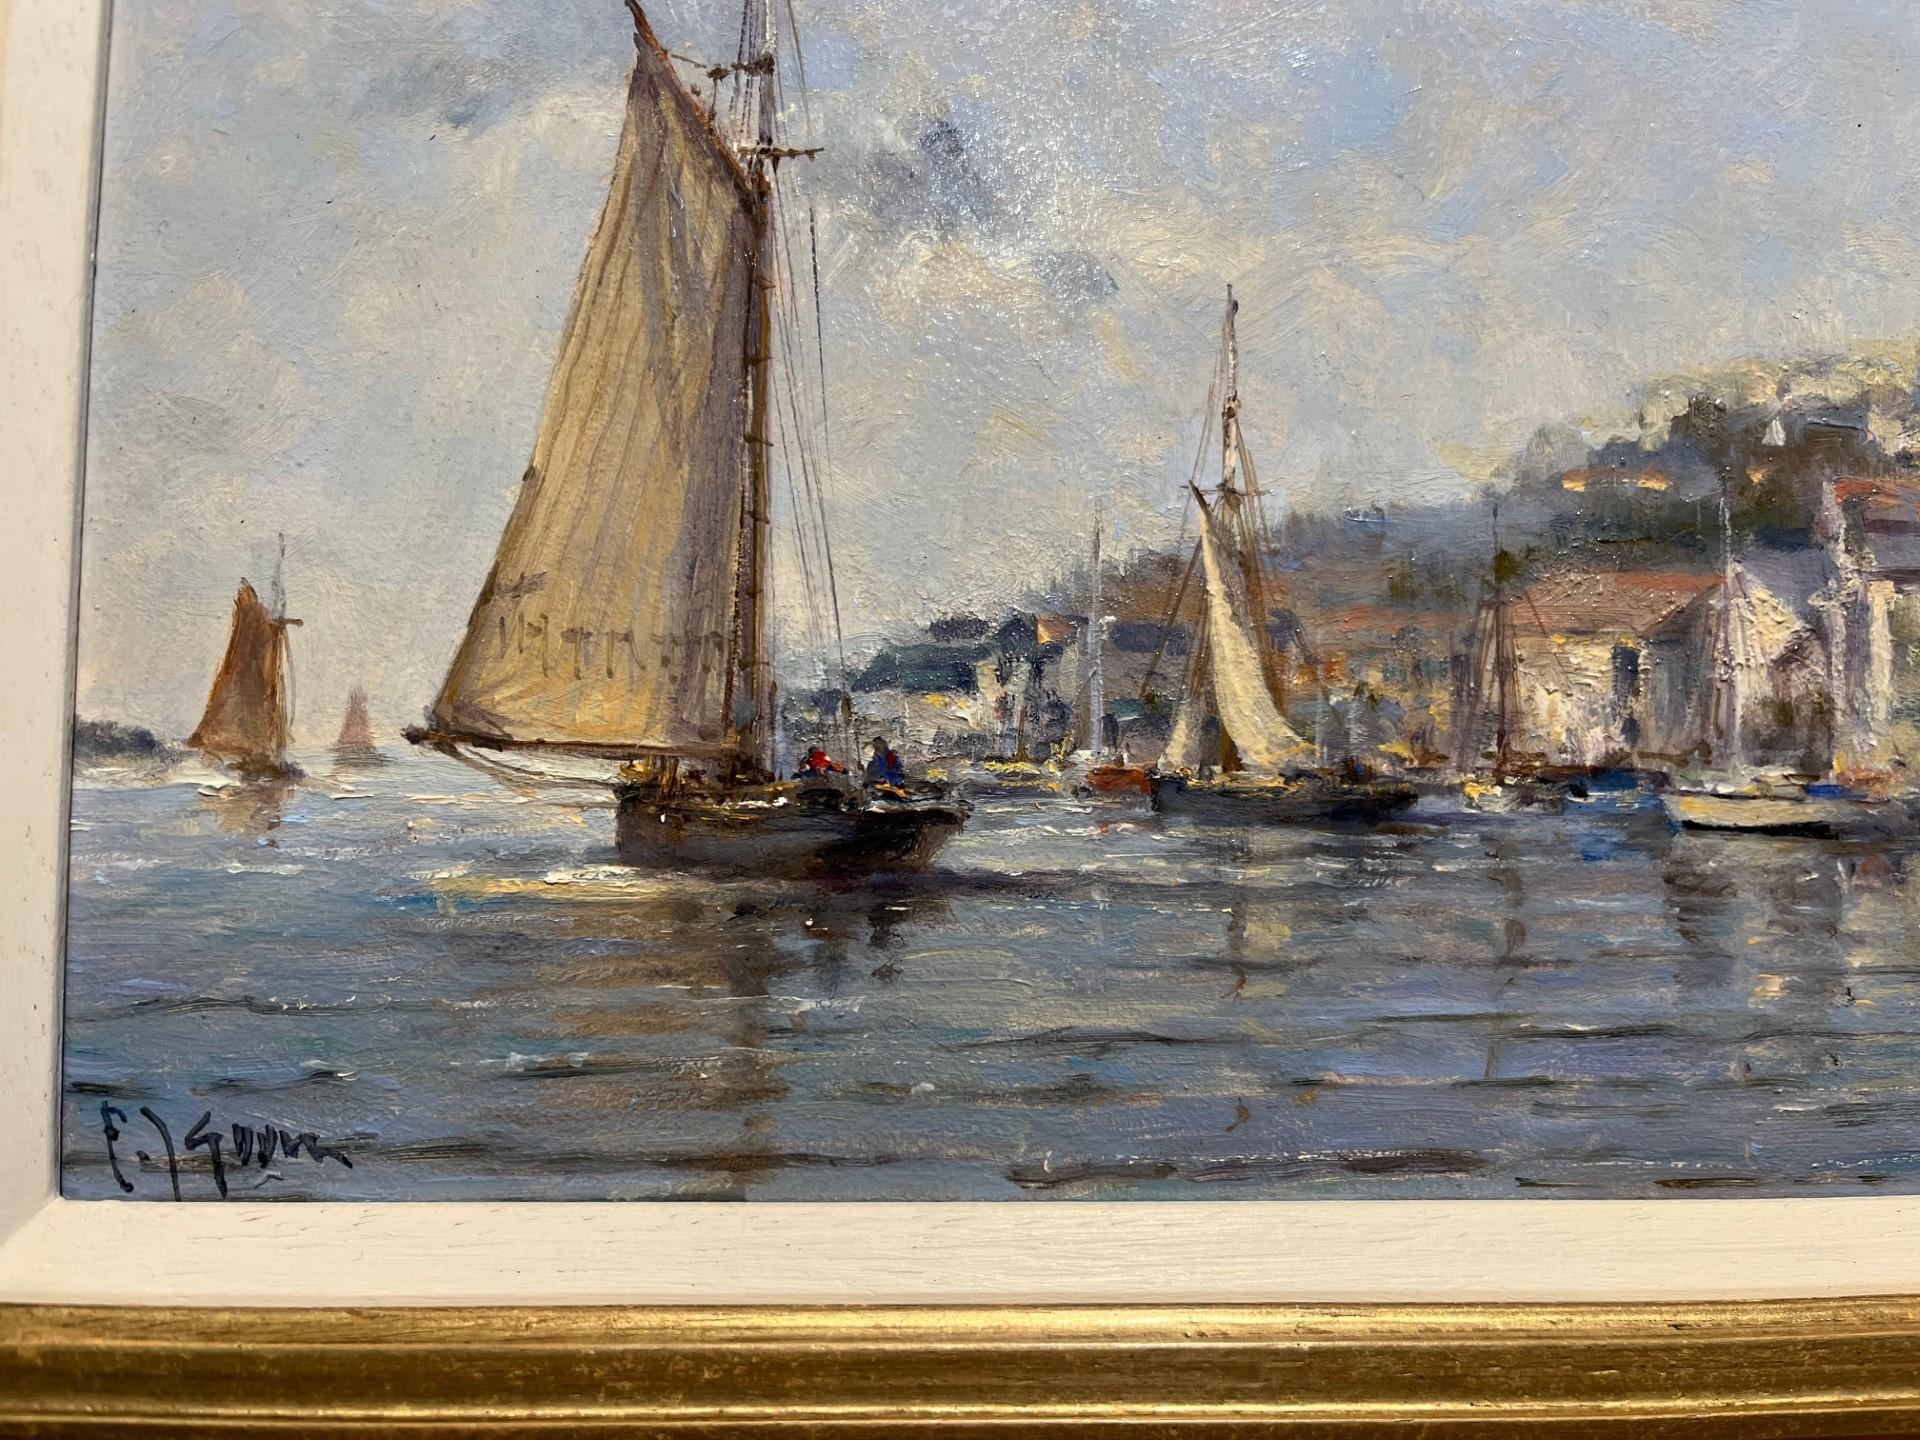 Sailing Boats on the Fowey River
Oil on Panel, Signed and Framed

A stunning gem by the wonderful Frits Goosen.  This oil depicts Sailing boats in the Fowey Estuary with the beautiful town on Fowey in the background with the church visible and the